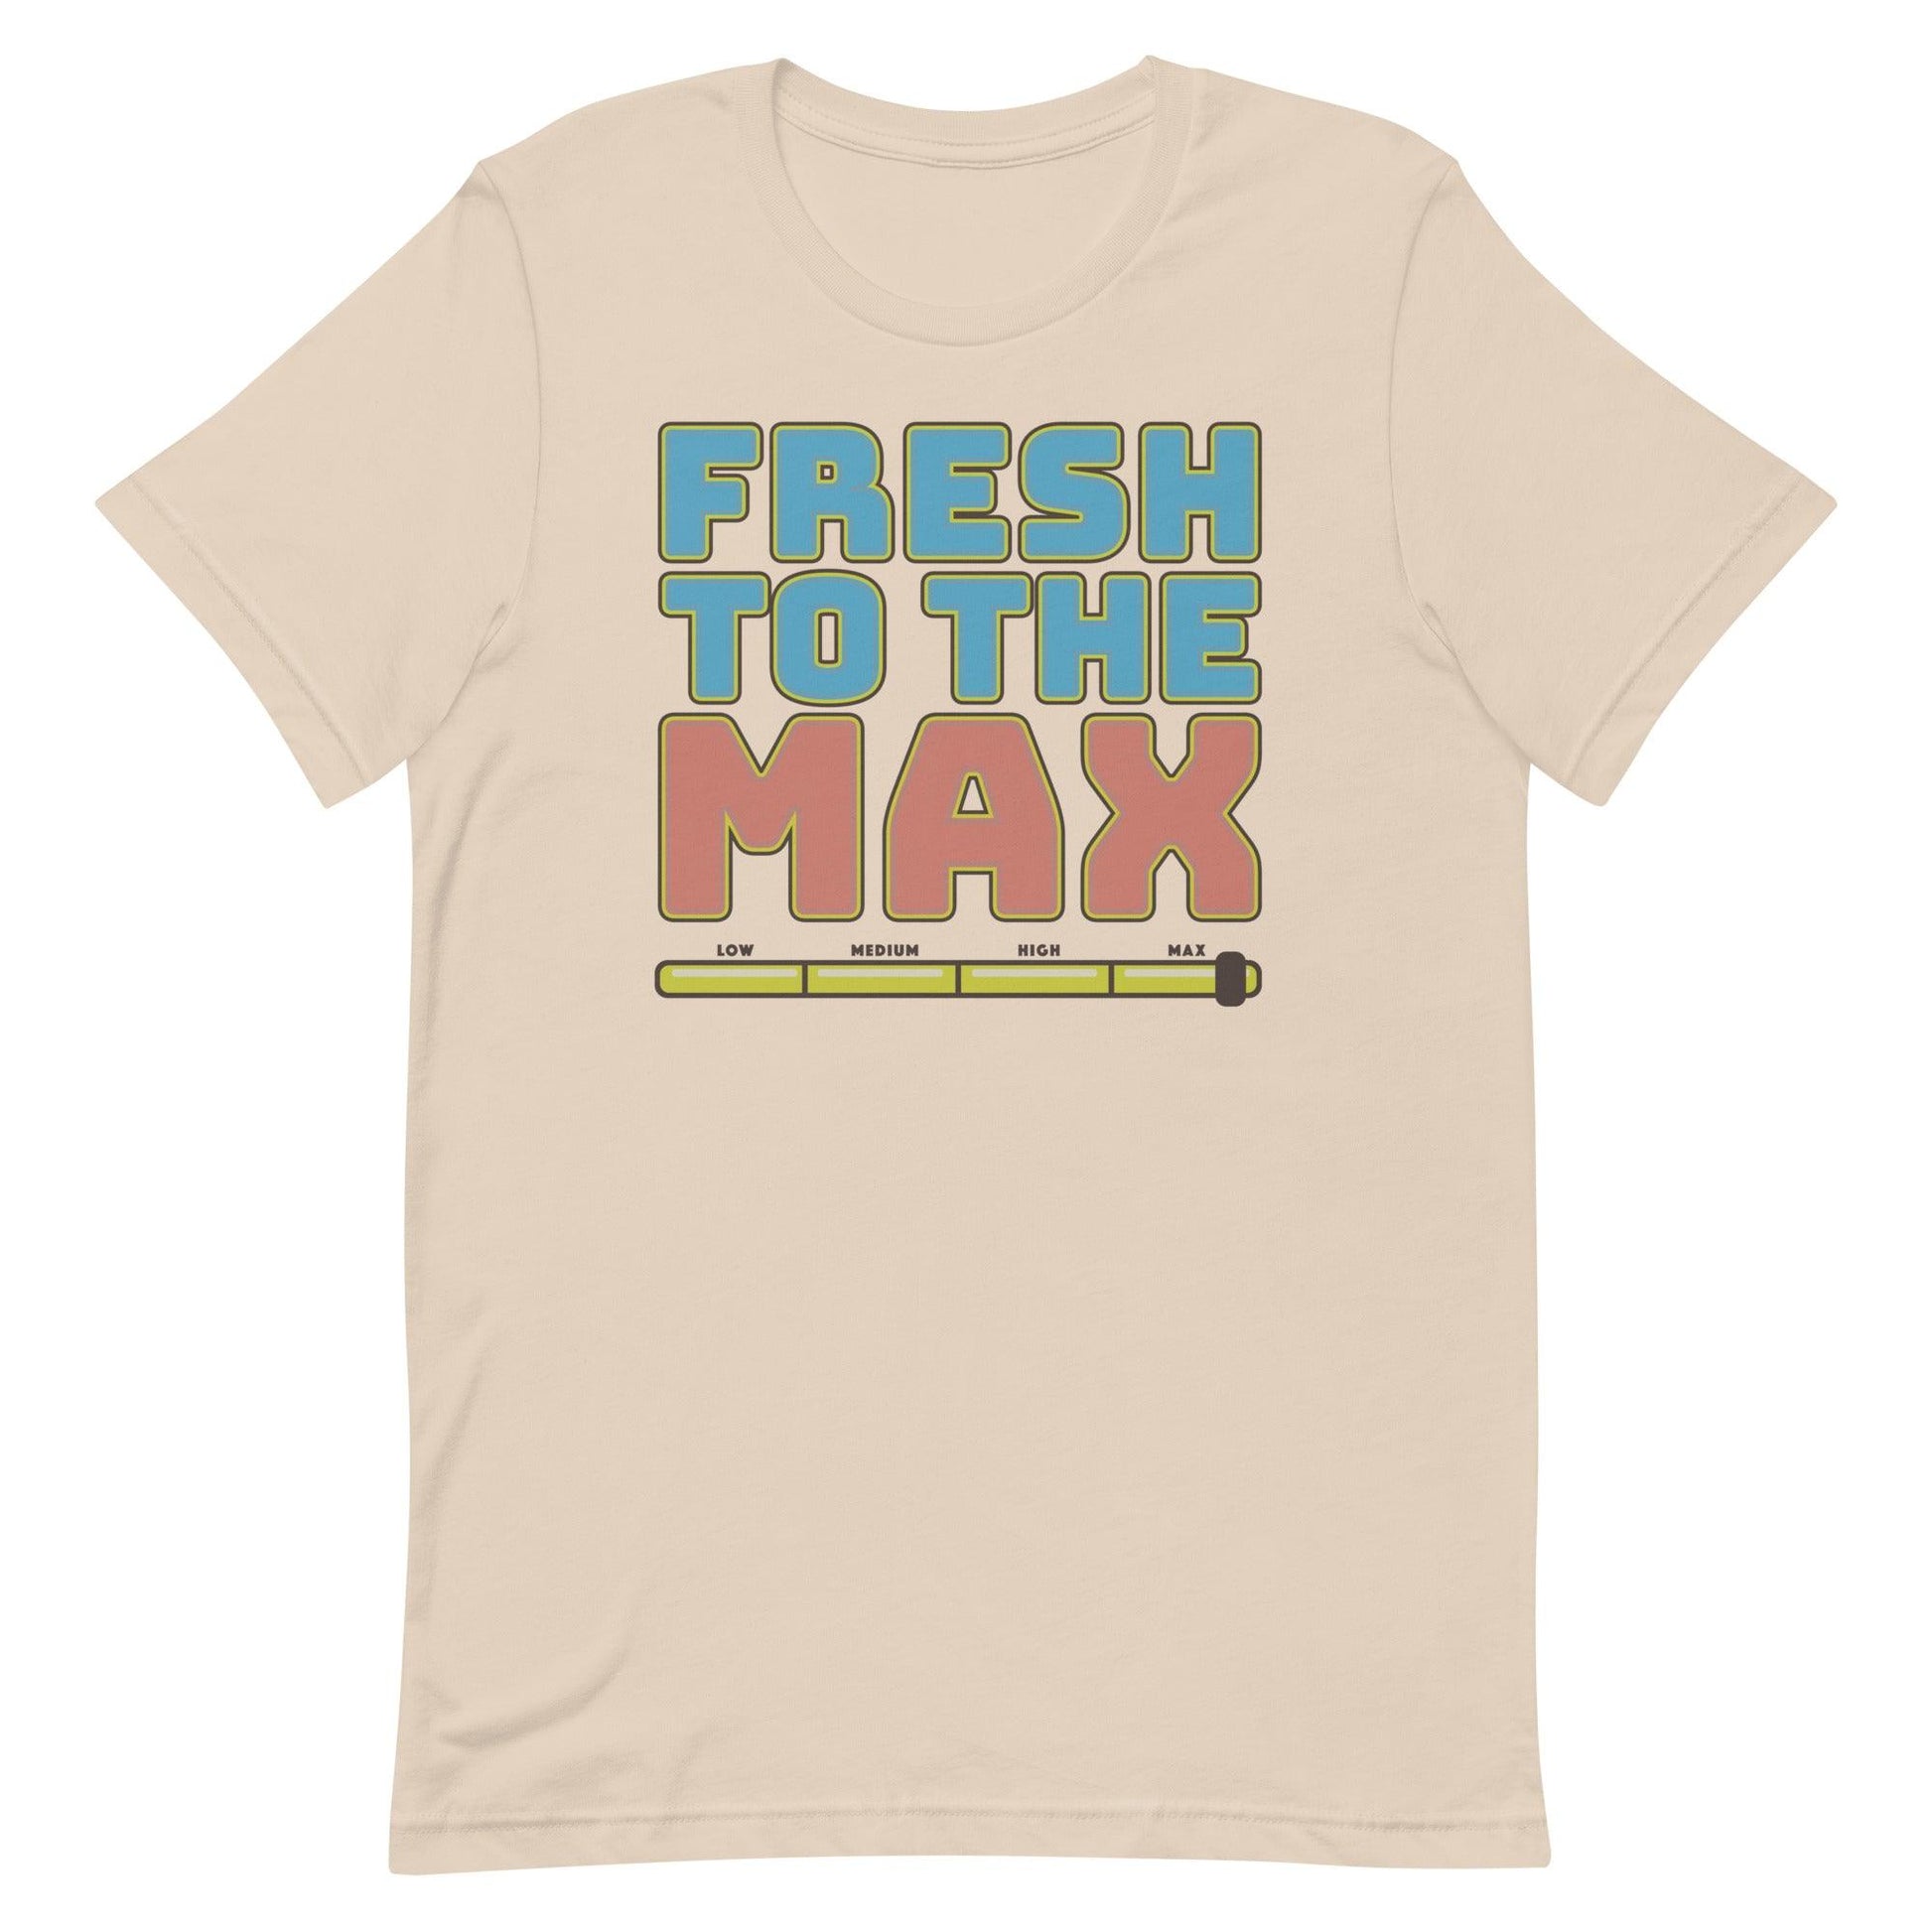 Fresh To The Max Shirt To Match Nike Air Max 1 Light Madder Root - SNKADX